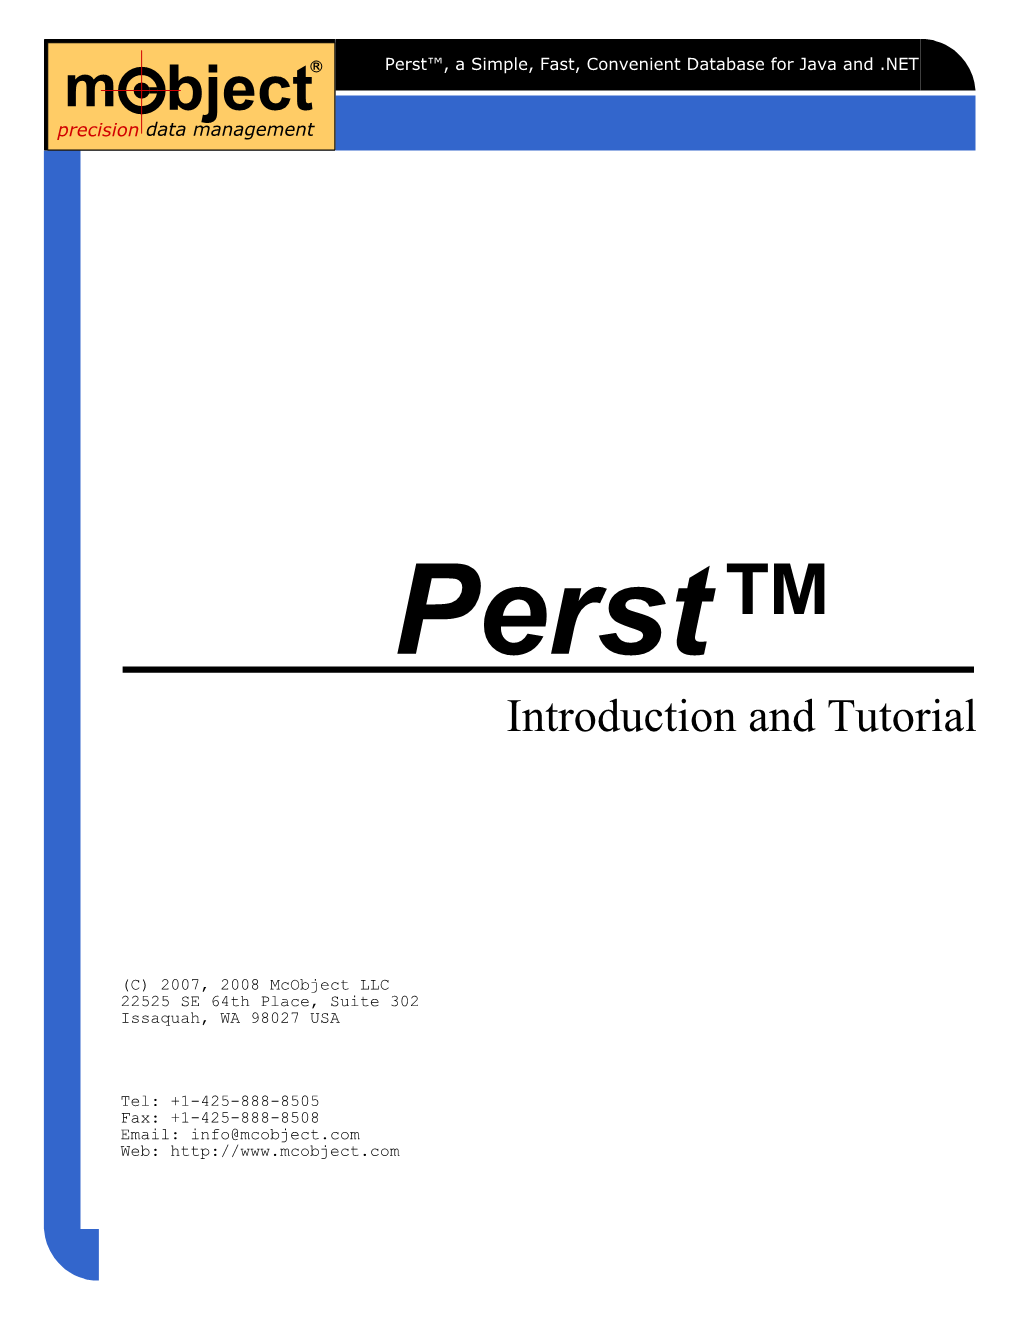 Perst Introduction and Tutorial